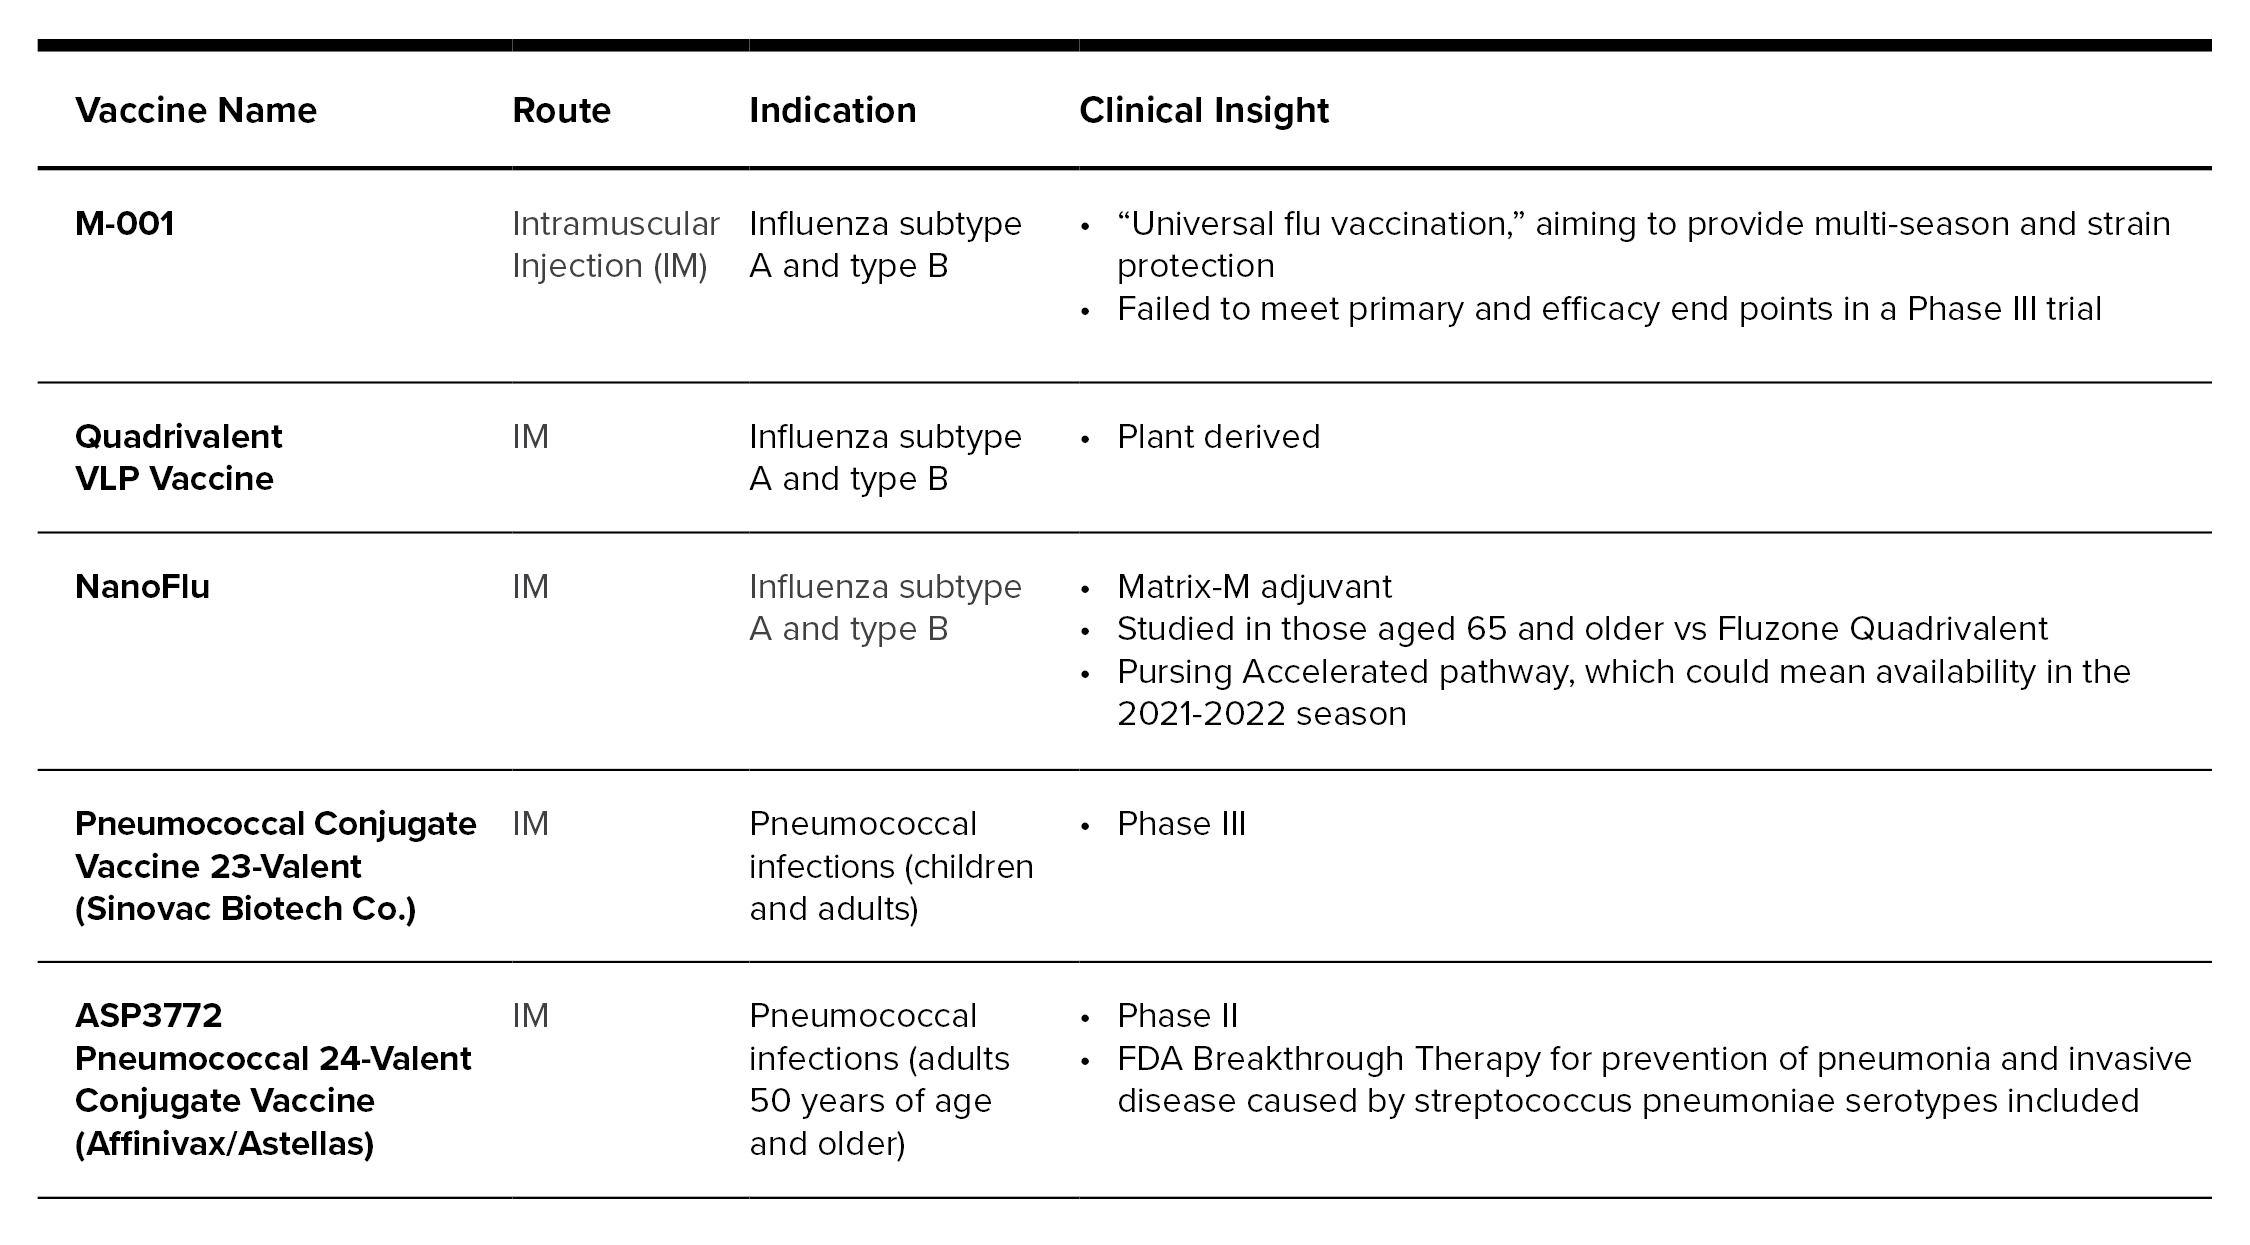 Influenza and Pneumococcal Table